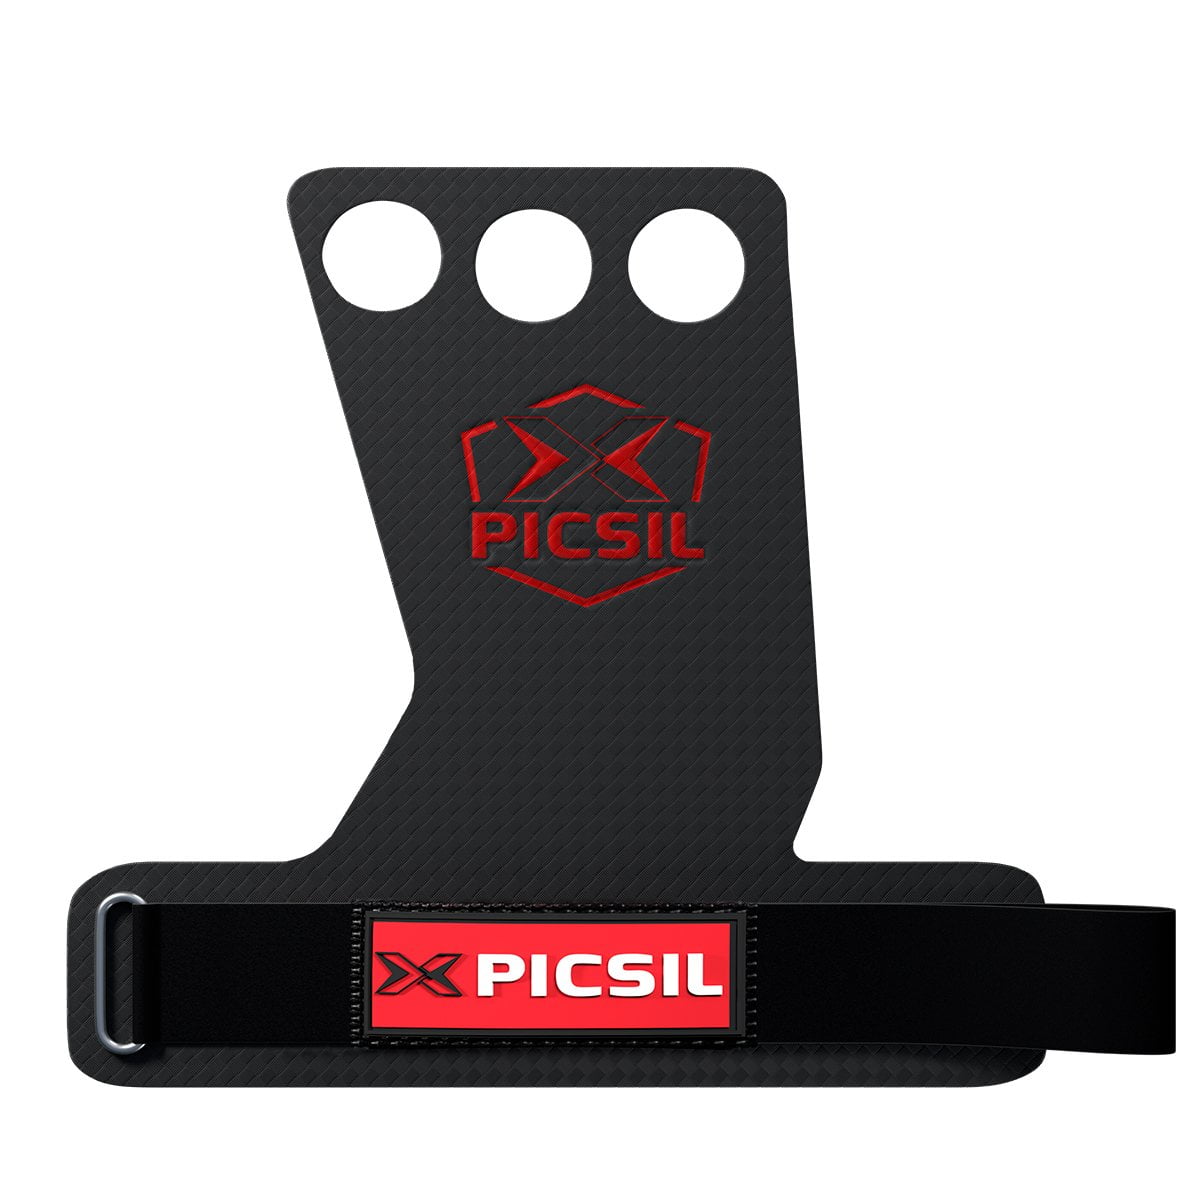 Hand grips X PICSIL PicSil 3&2 HOLES Hand grips for gymnastic men and women 